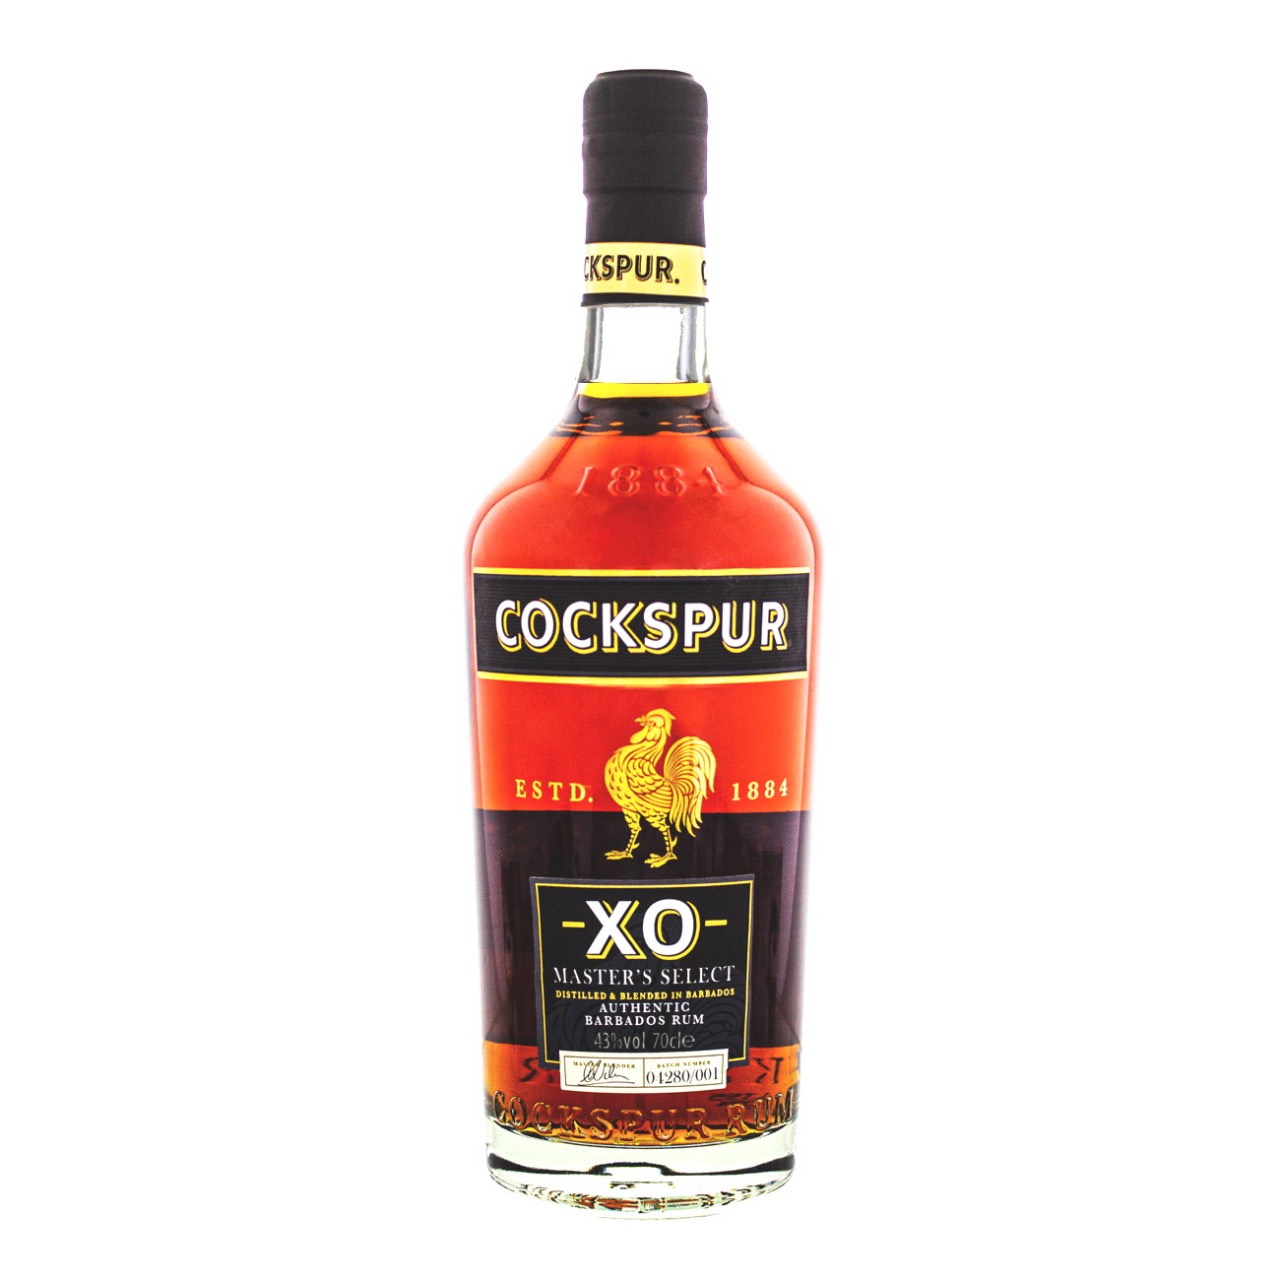 Bottle image of Cockspur XO Masters Select